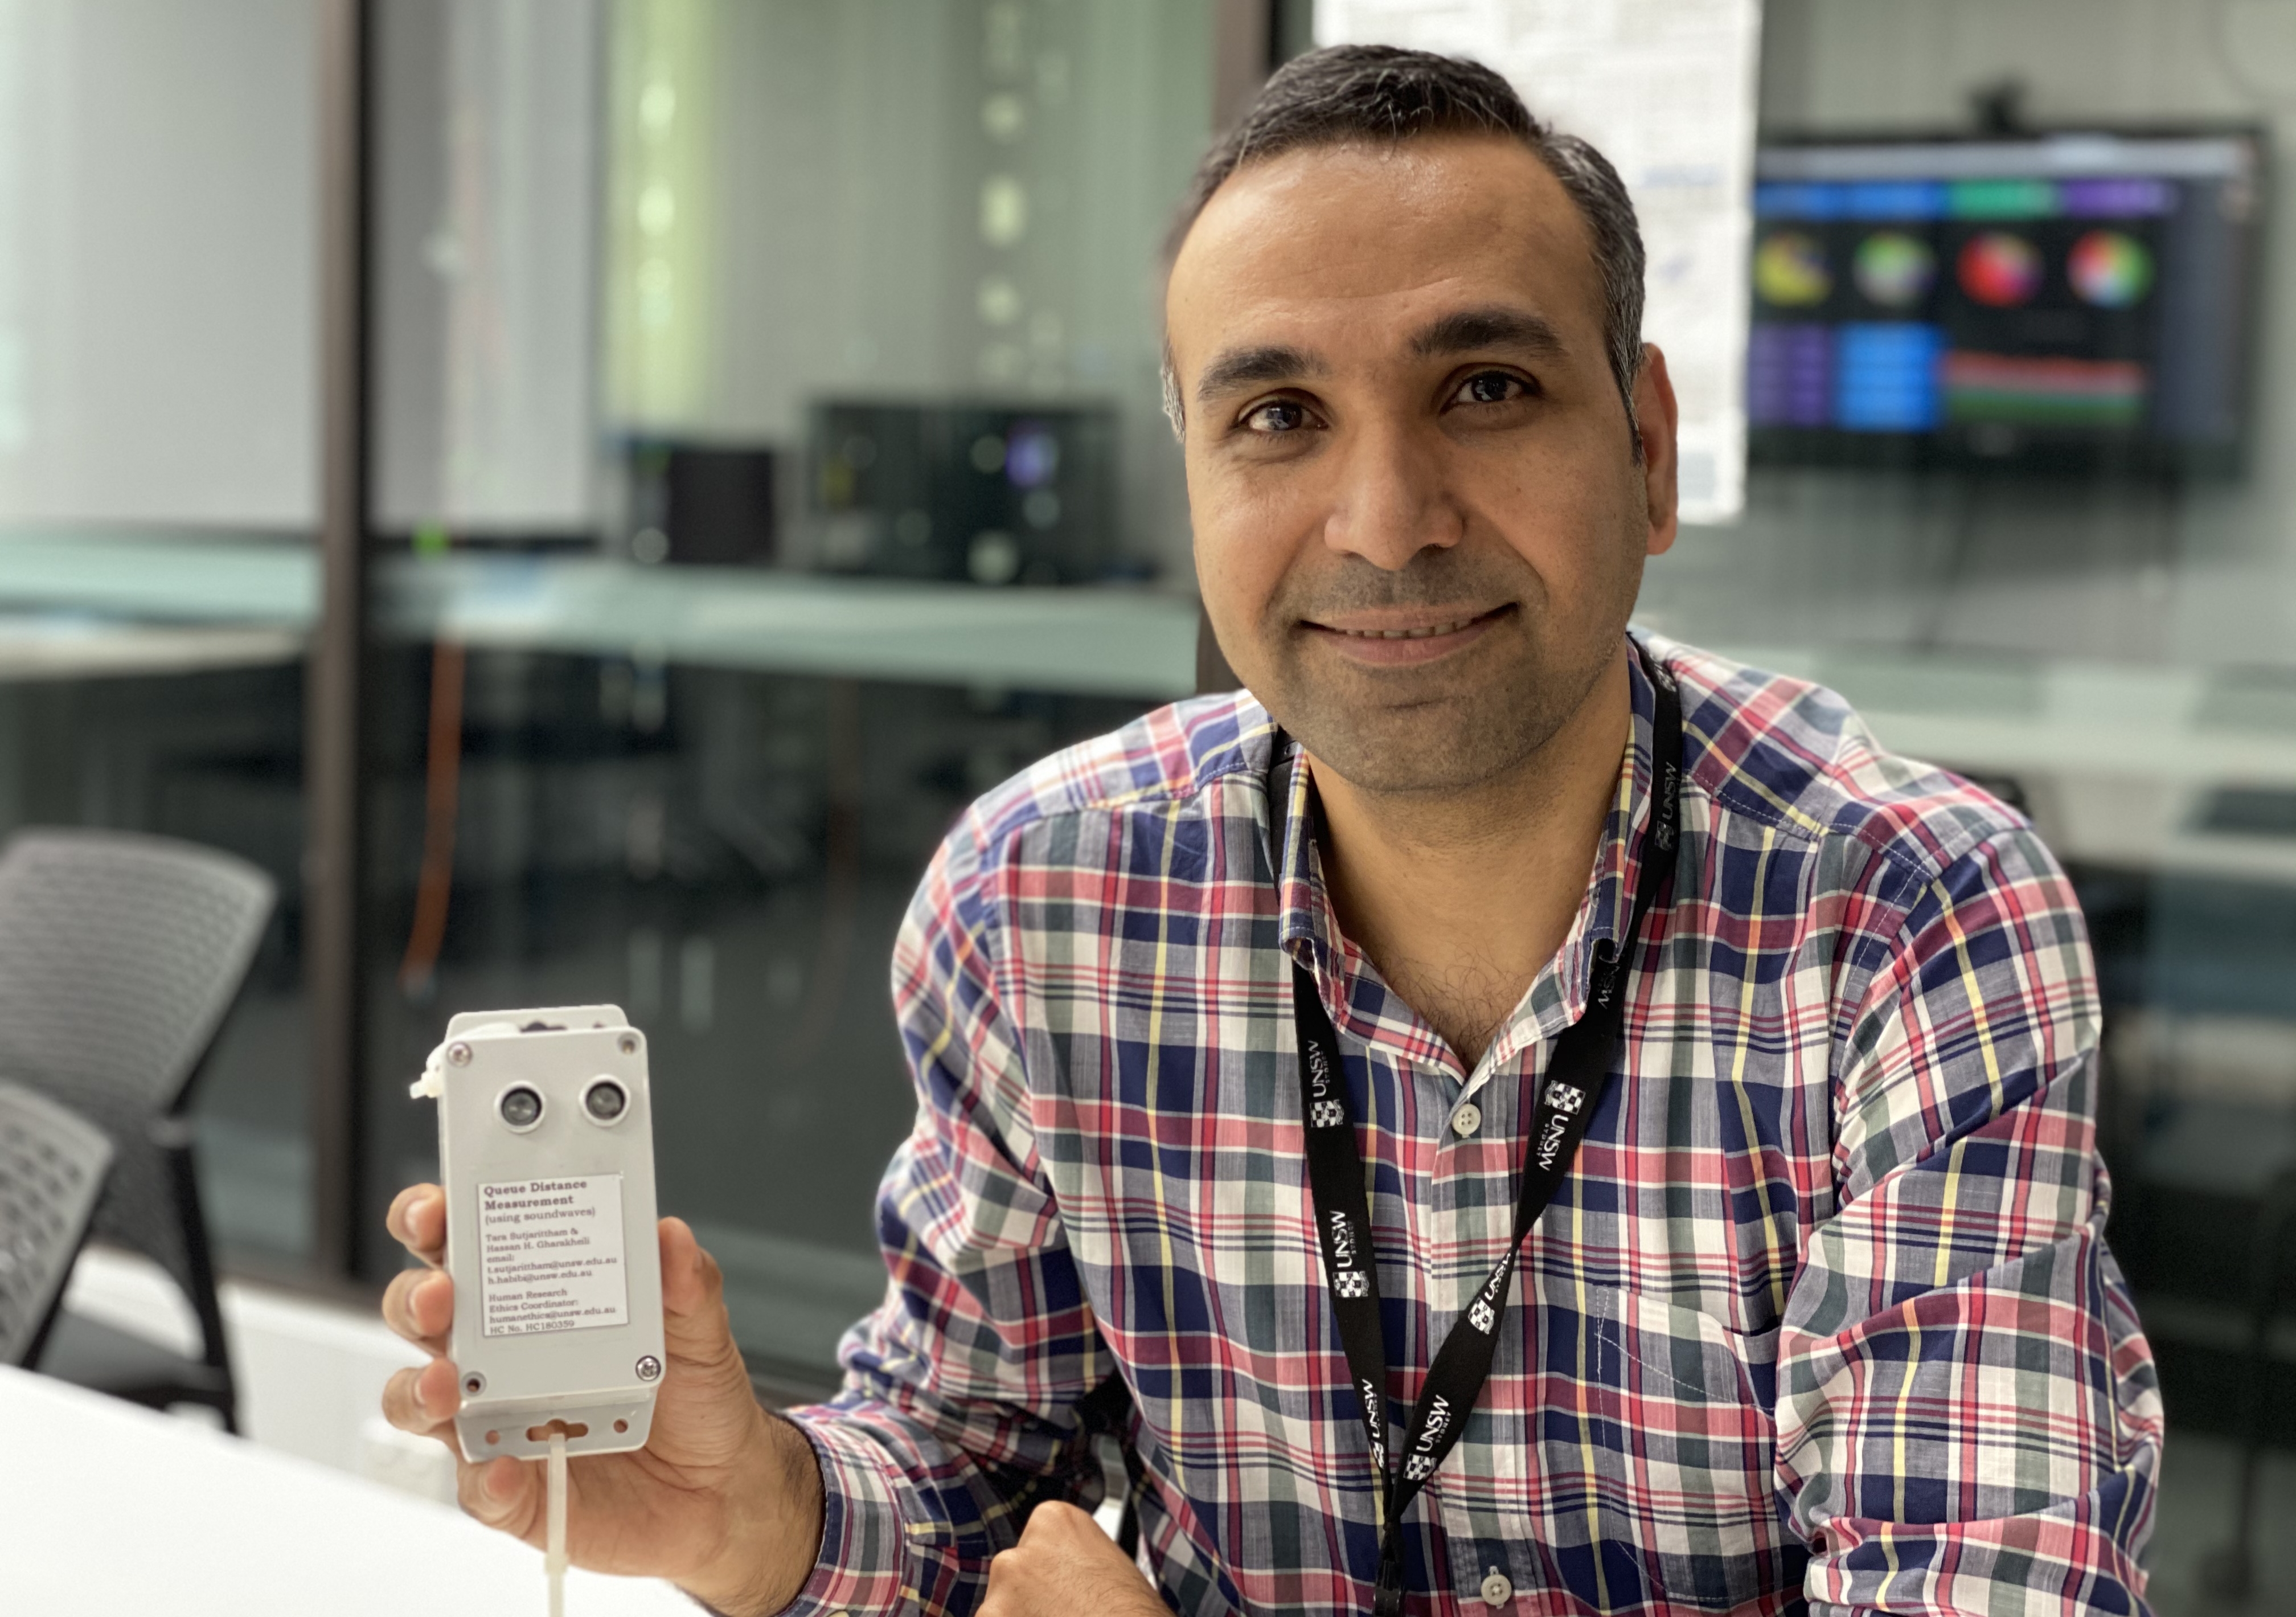 Dr Hassan Habibi Gharakheili with one of the sensors purpose-built to monitor the line length of people queuing for the bus at UNSW. Photo: UNSW